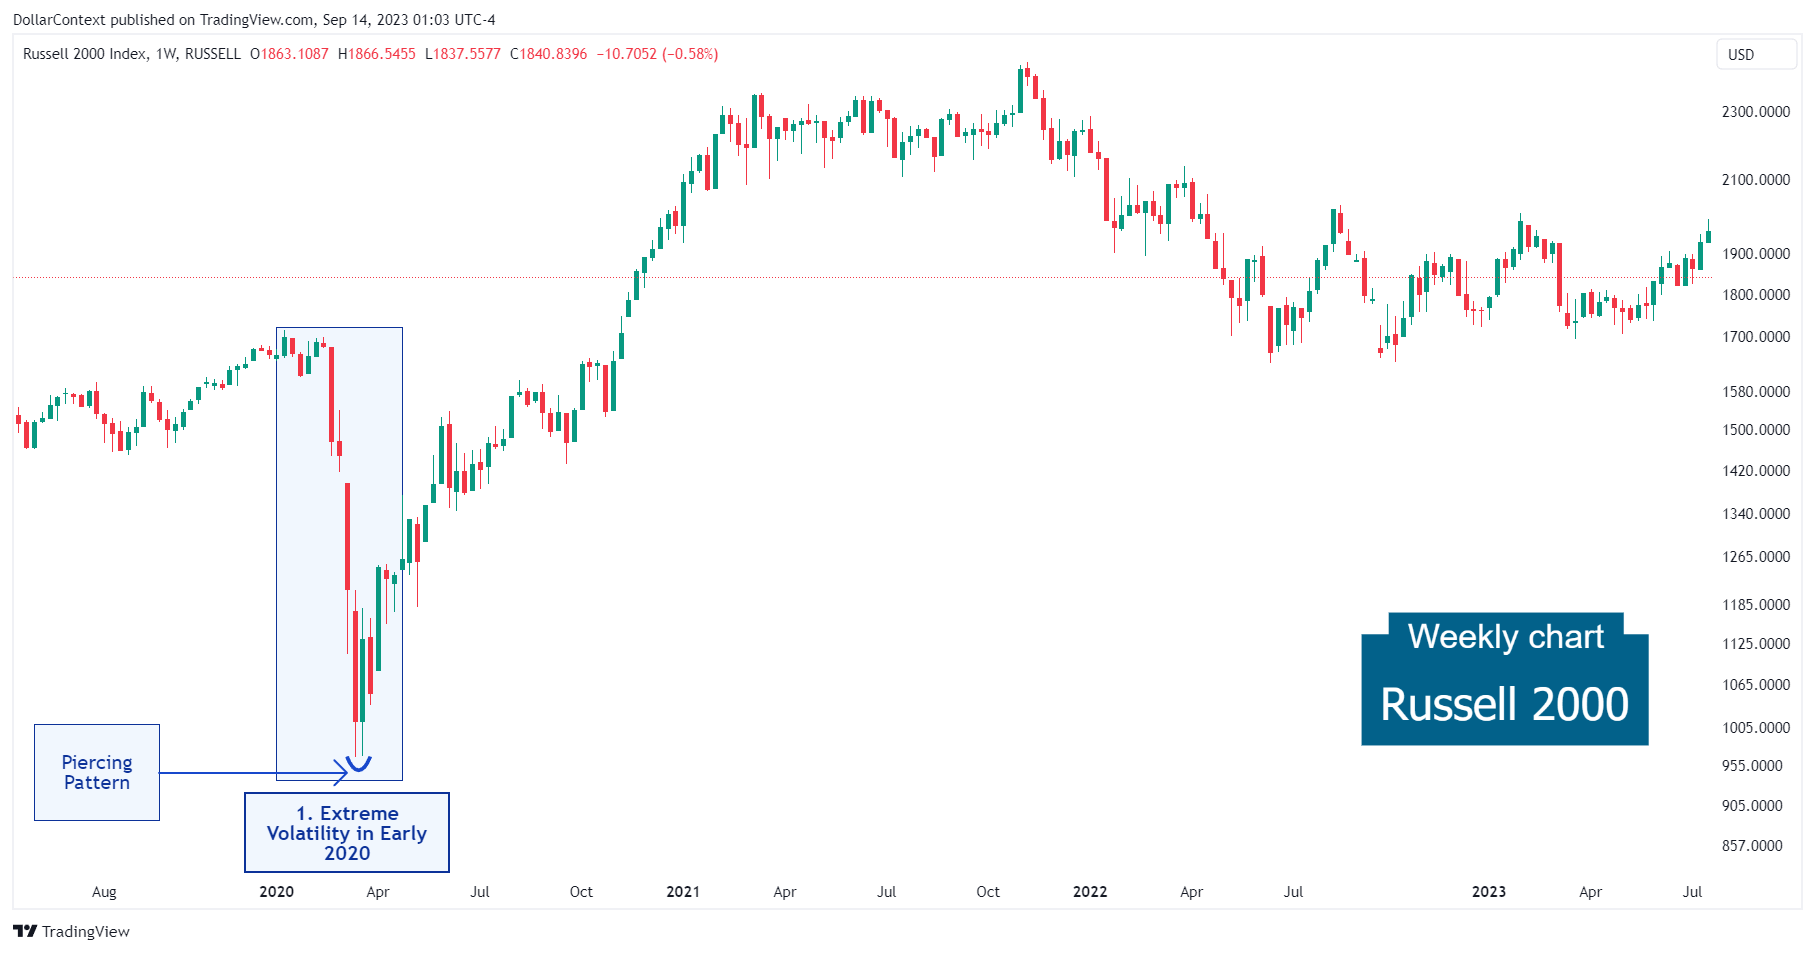 Russell 2000: Extreme Volatility in Early 2020 (Weekly Chart)